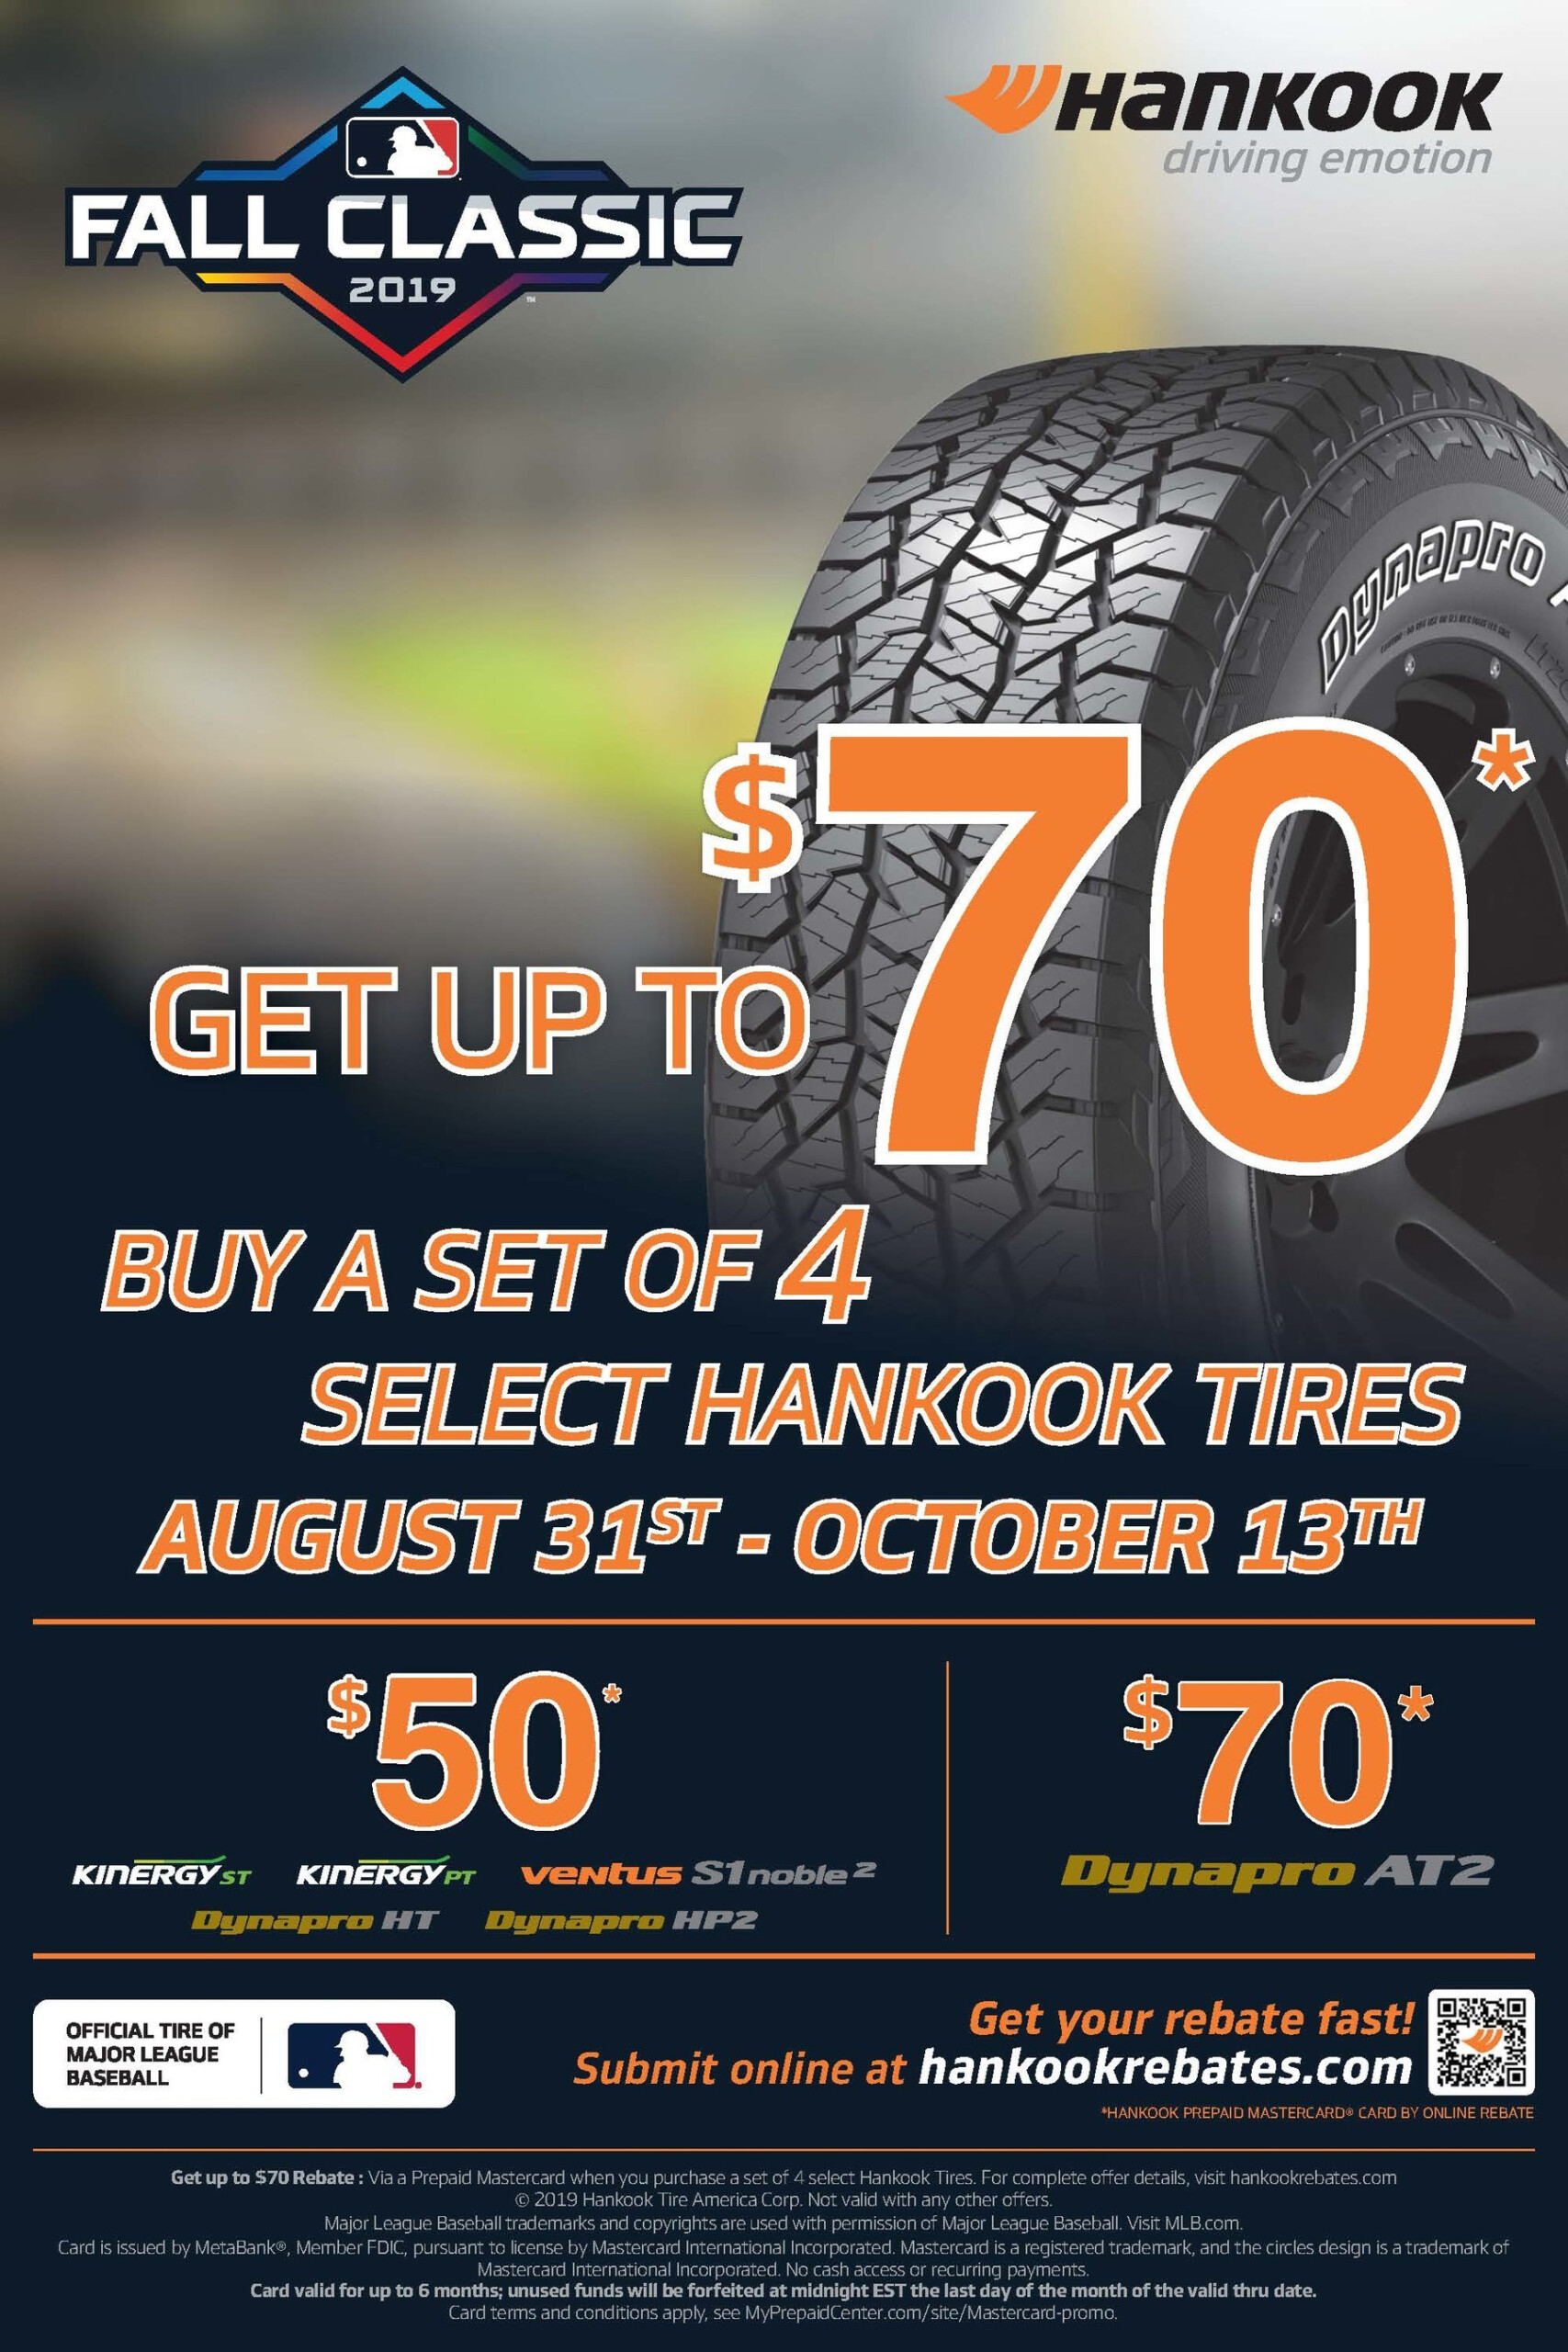 Hankook Tire Unveils 2019 Fall Classic Rebate Promotion